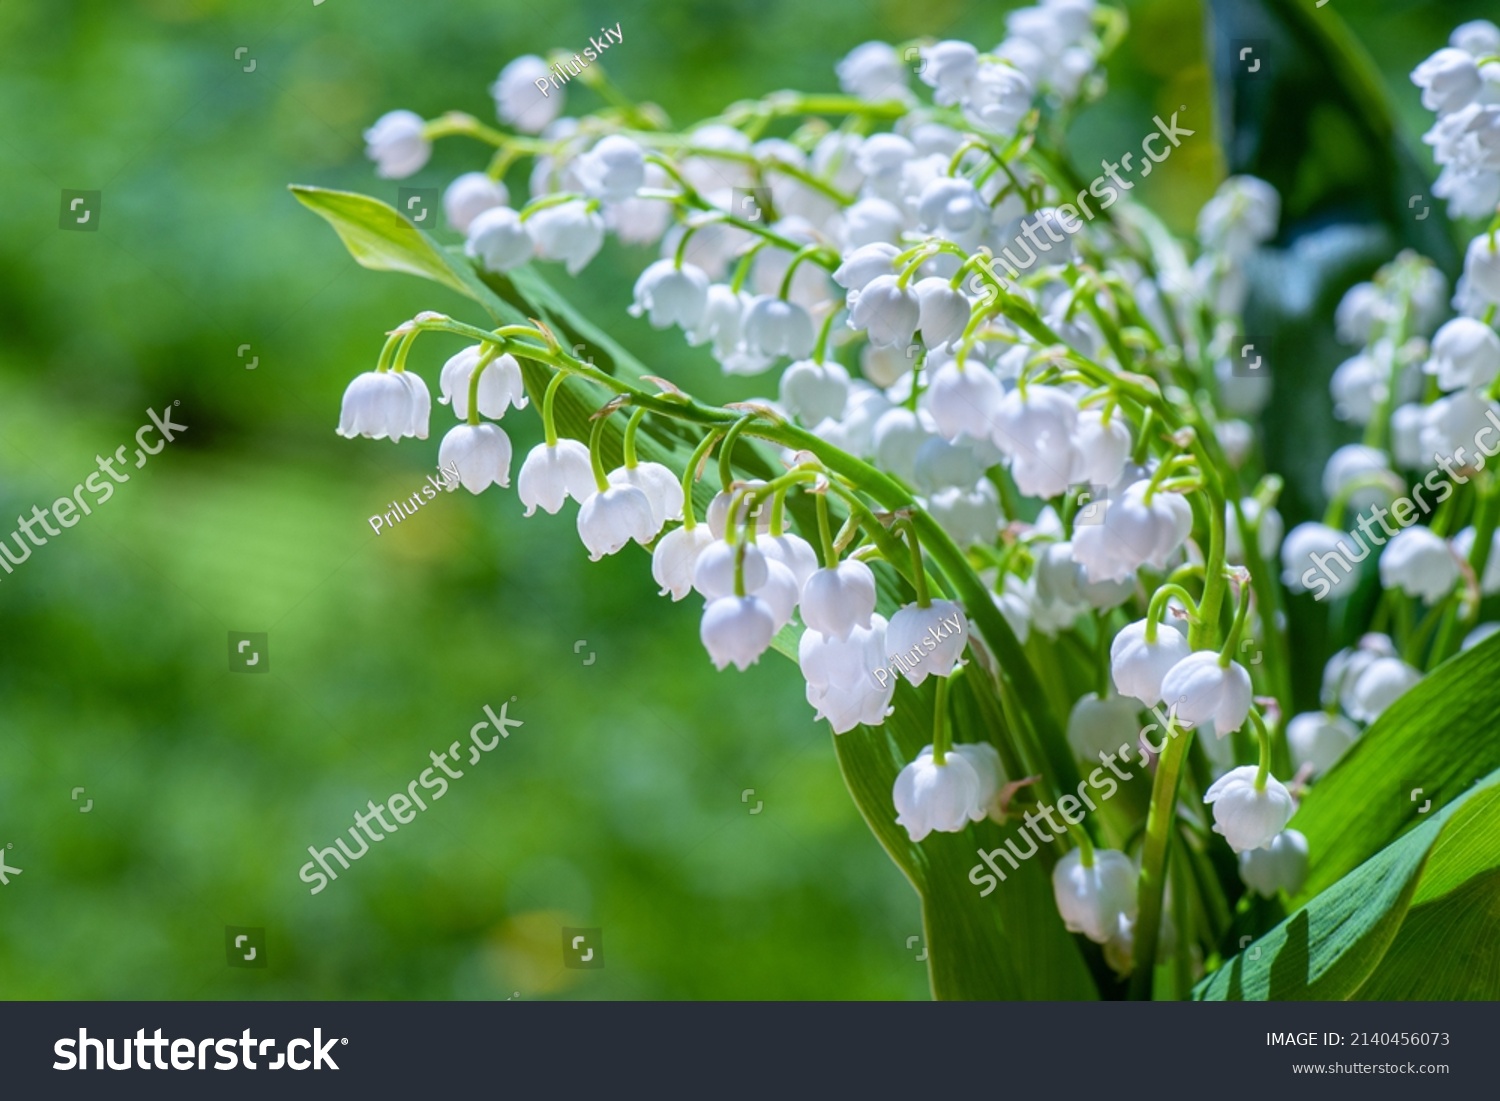 Lily of valley. Flowering of lily of valley in spring in forest against background of green forest close-up, horizontal photo. #2140456073